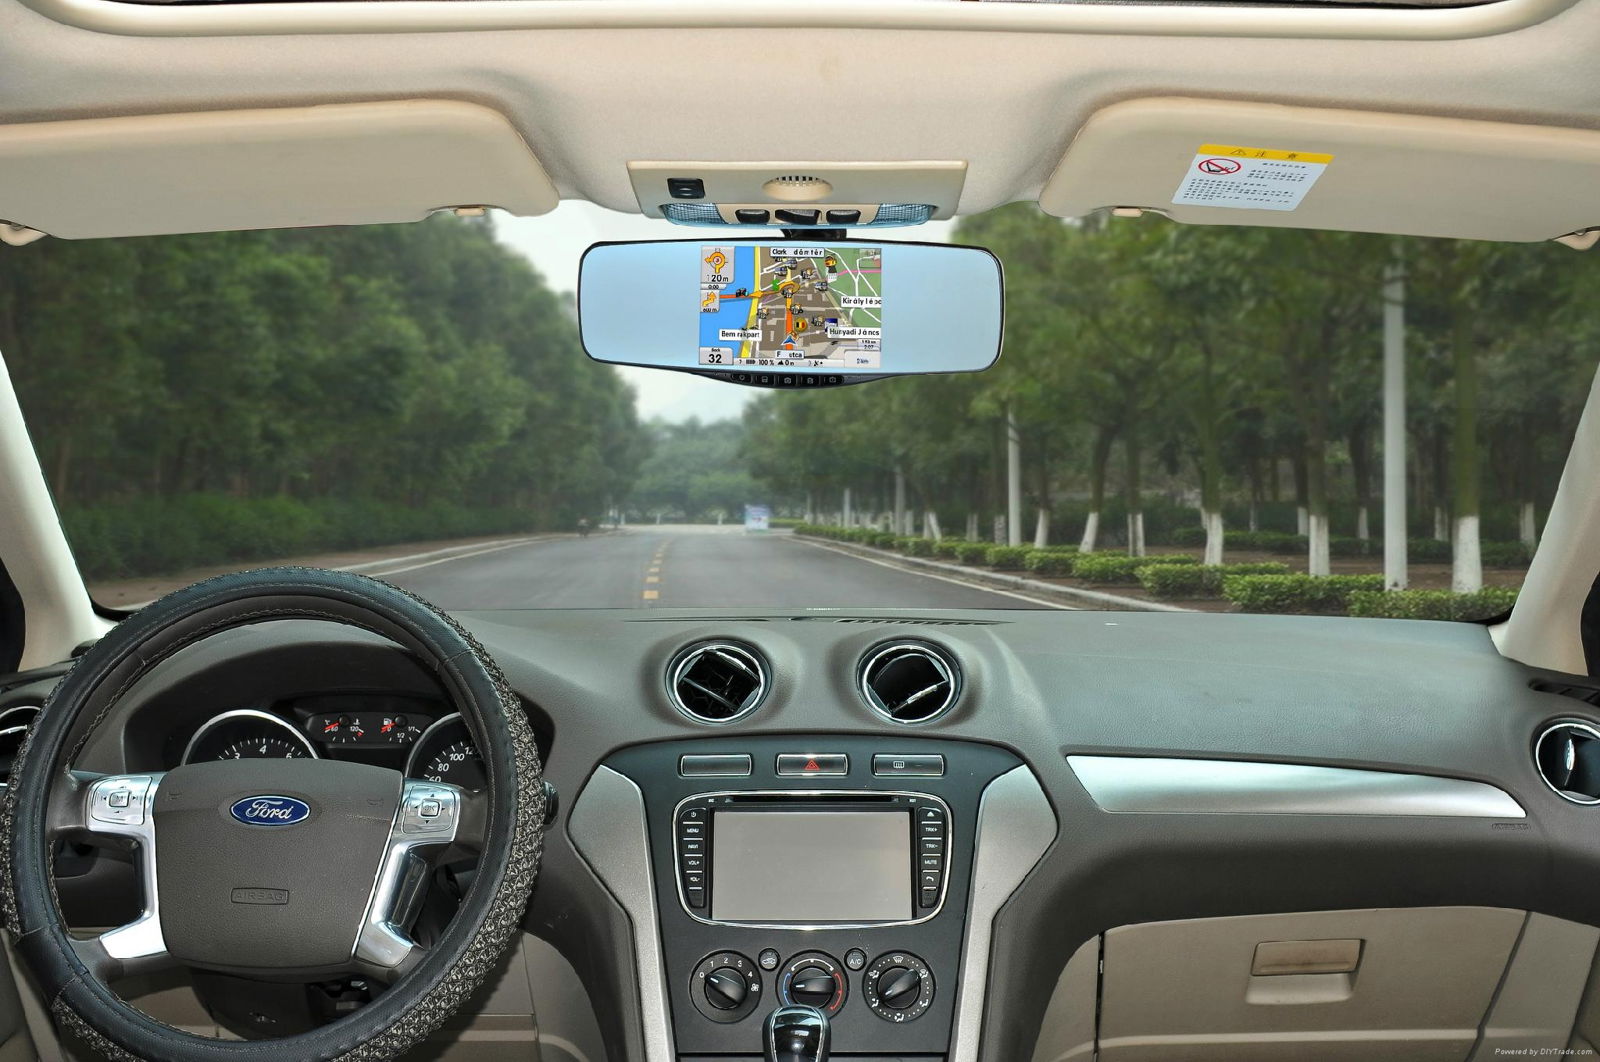  factory price rear view mirror with gps,bluetooth,vedio recorder... 2